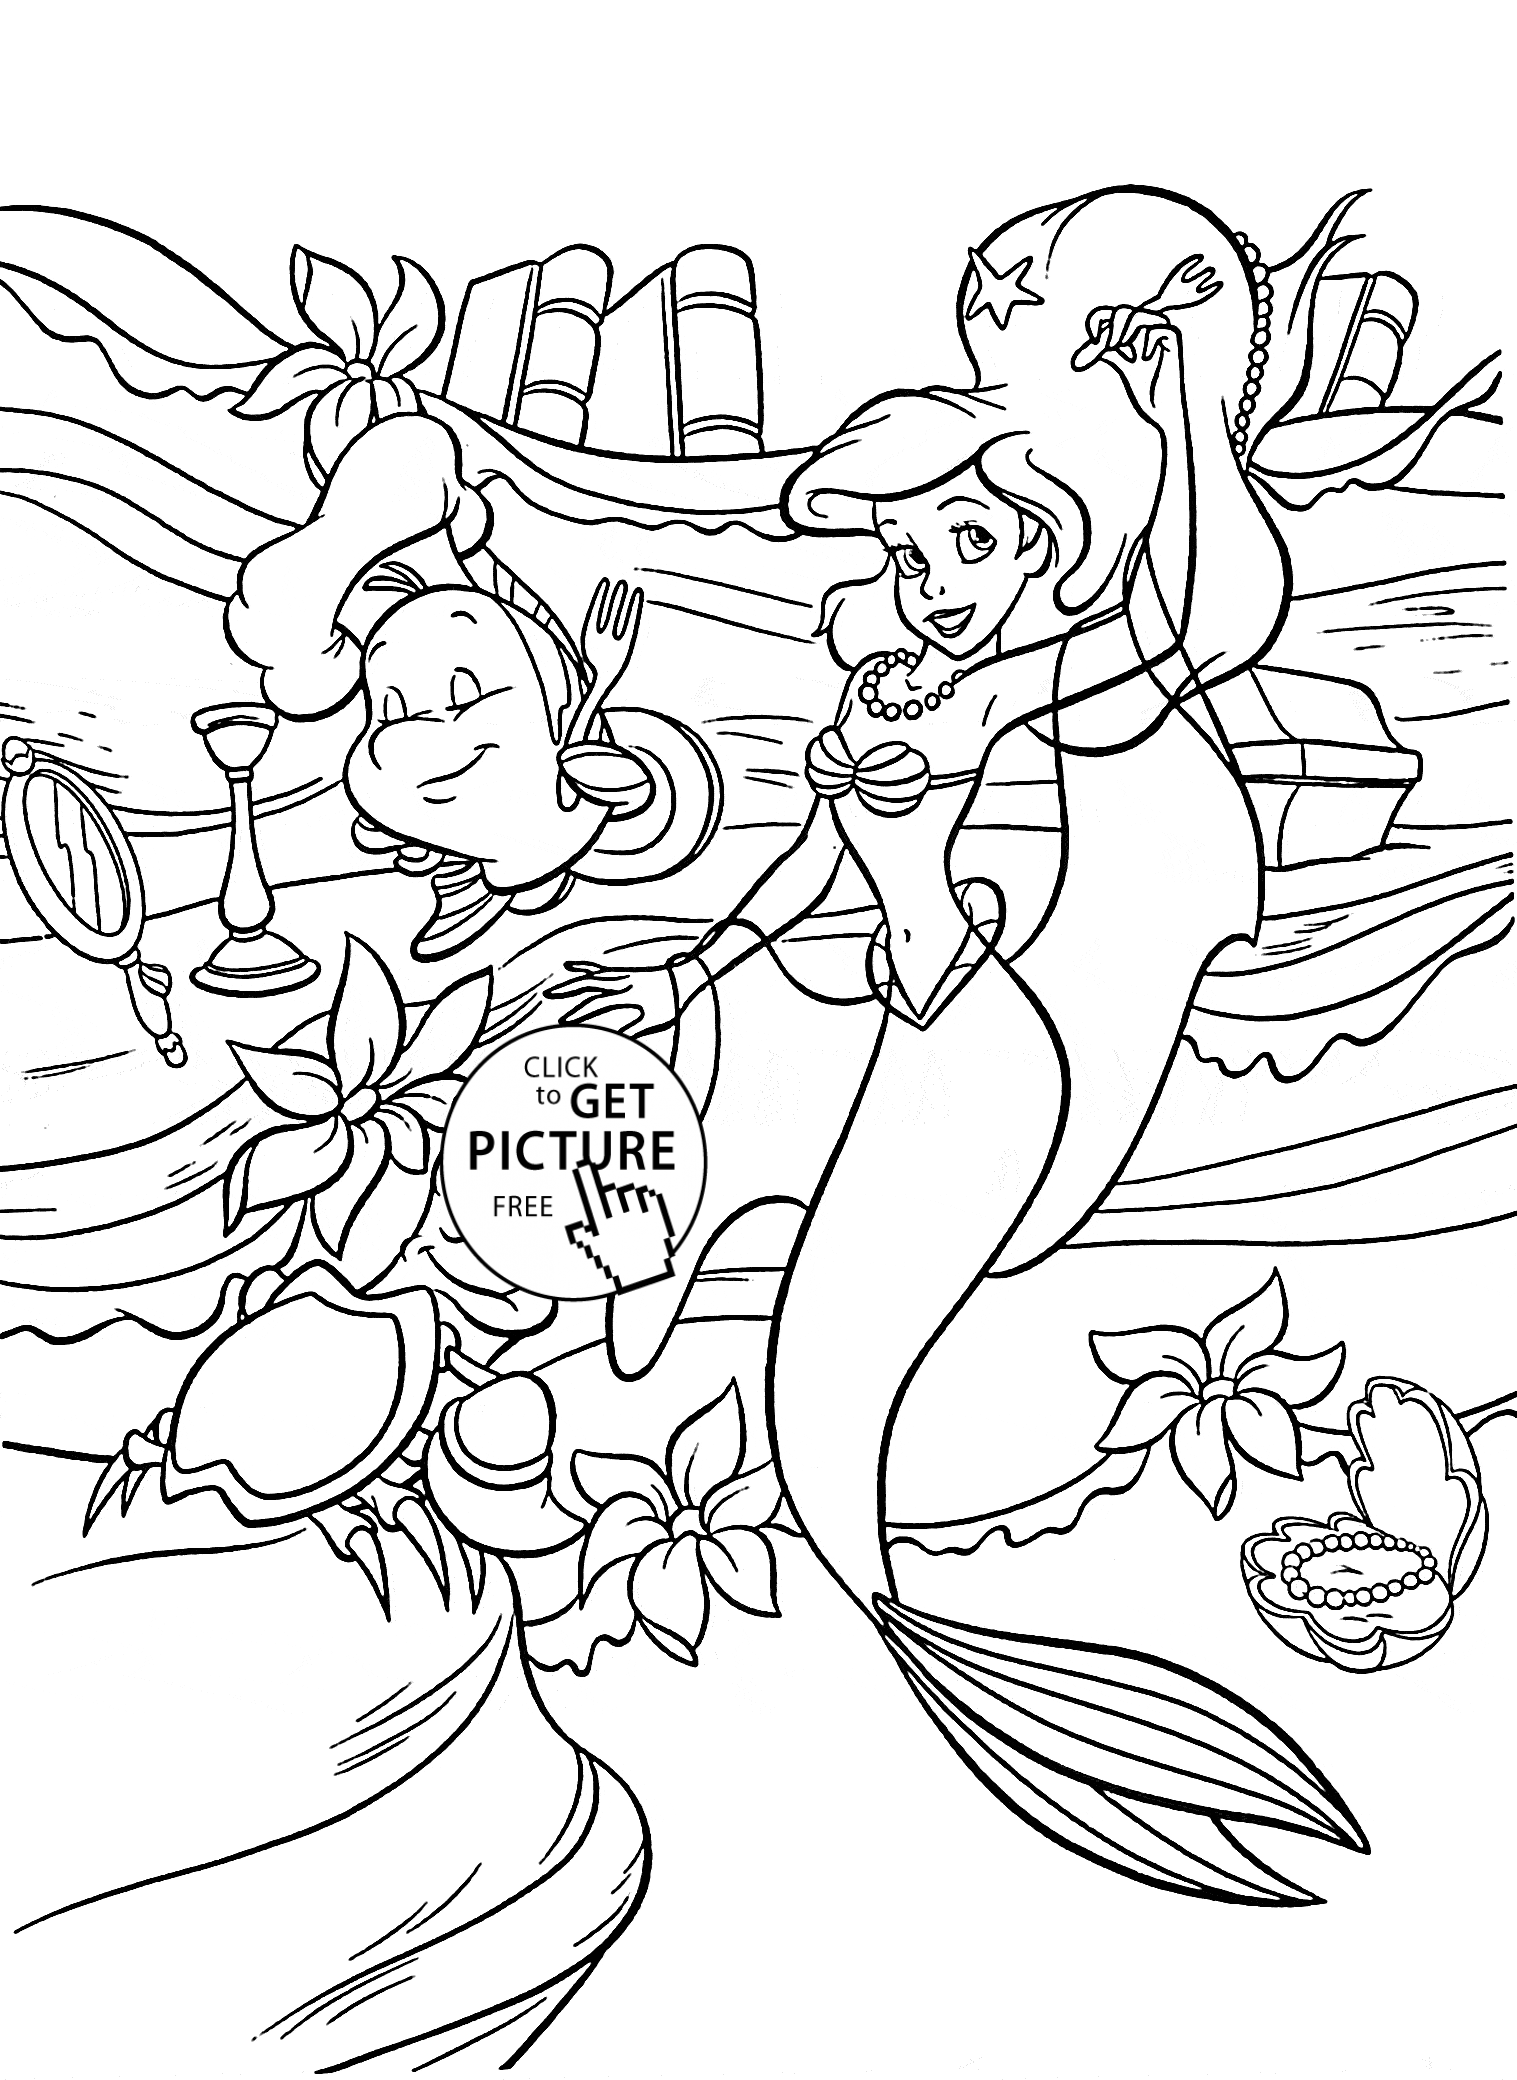 The Little Princess Mermaid Coloring Page For Kids, Disney